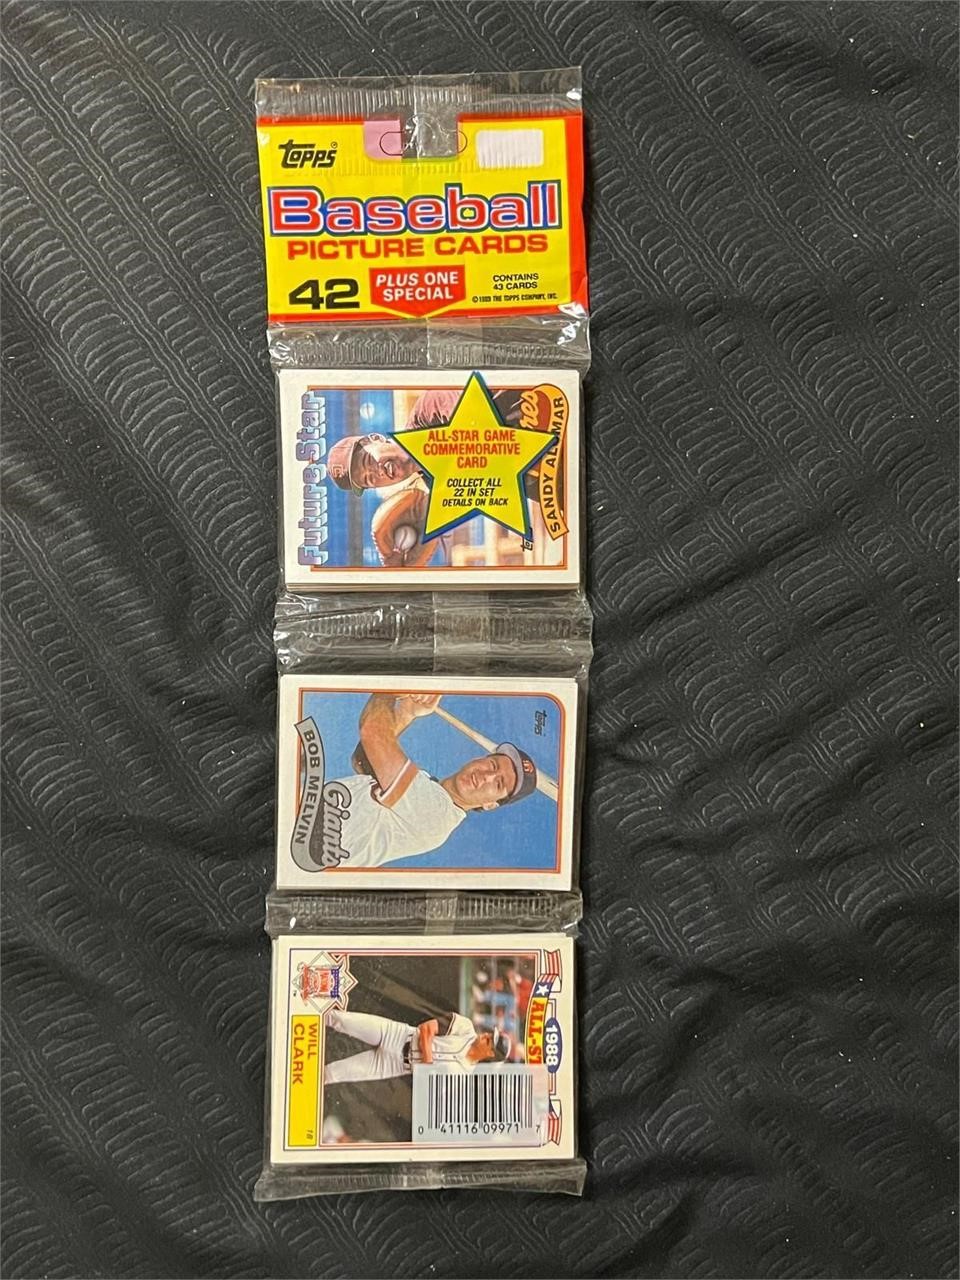 Topps Baseball Picture Cards  UNOPENED